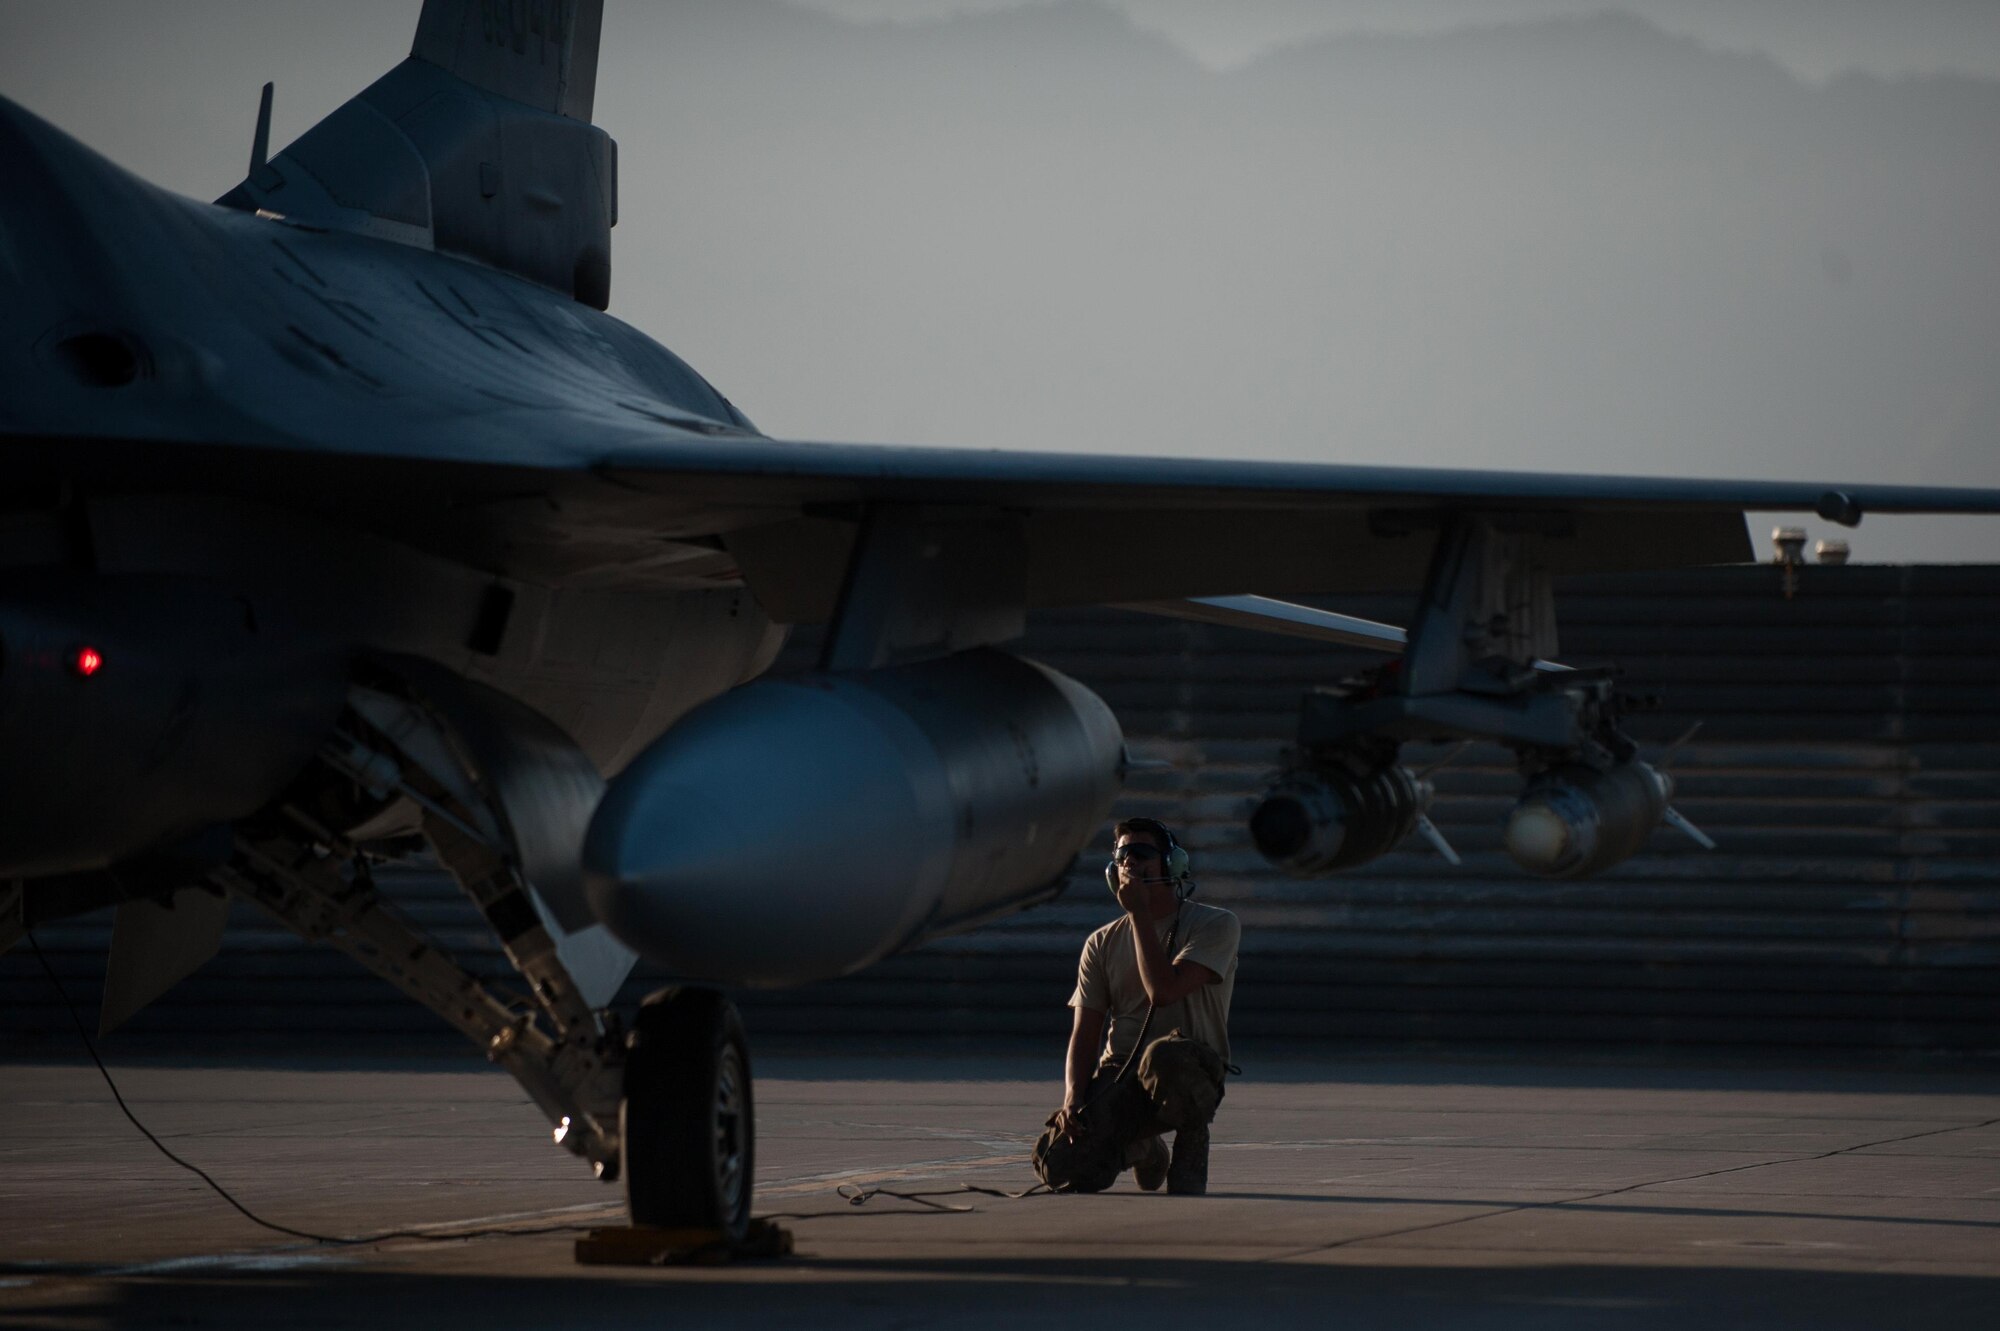 Airman 1st Class Christian Lamb, 455th Expeditionary Aircraft Maintenance Squadron crew chief, deployed from Aviano Air Base, Italy, performs a pre-flight inspection on an F-16 Fighting Falcon at Bagram Airfield, Afghanistan, Oct. 30, 2015. The 455th EAMXS ensure Fighting Falcons on Bagram are prepared for flight and return them to a mission-ready state once they land. (U.S. Air Force photo by Tech. Sgt. Joseph Swafford/Released)